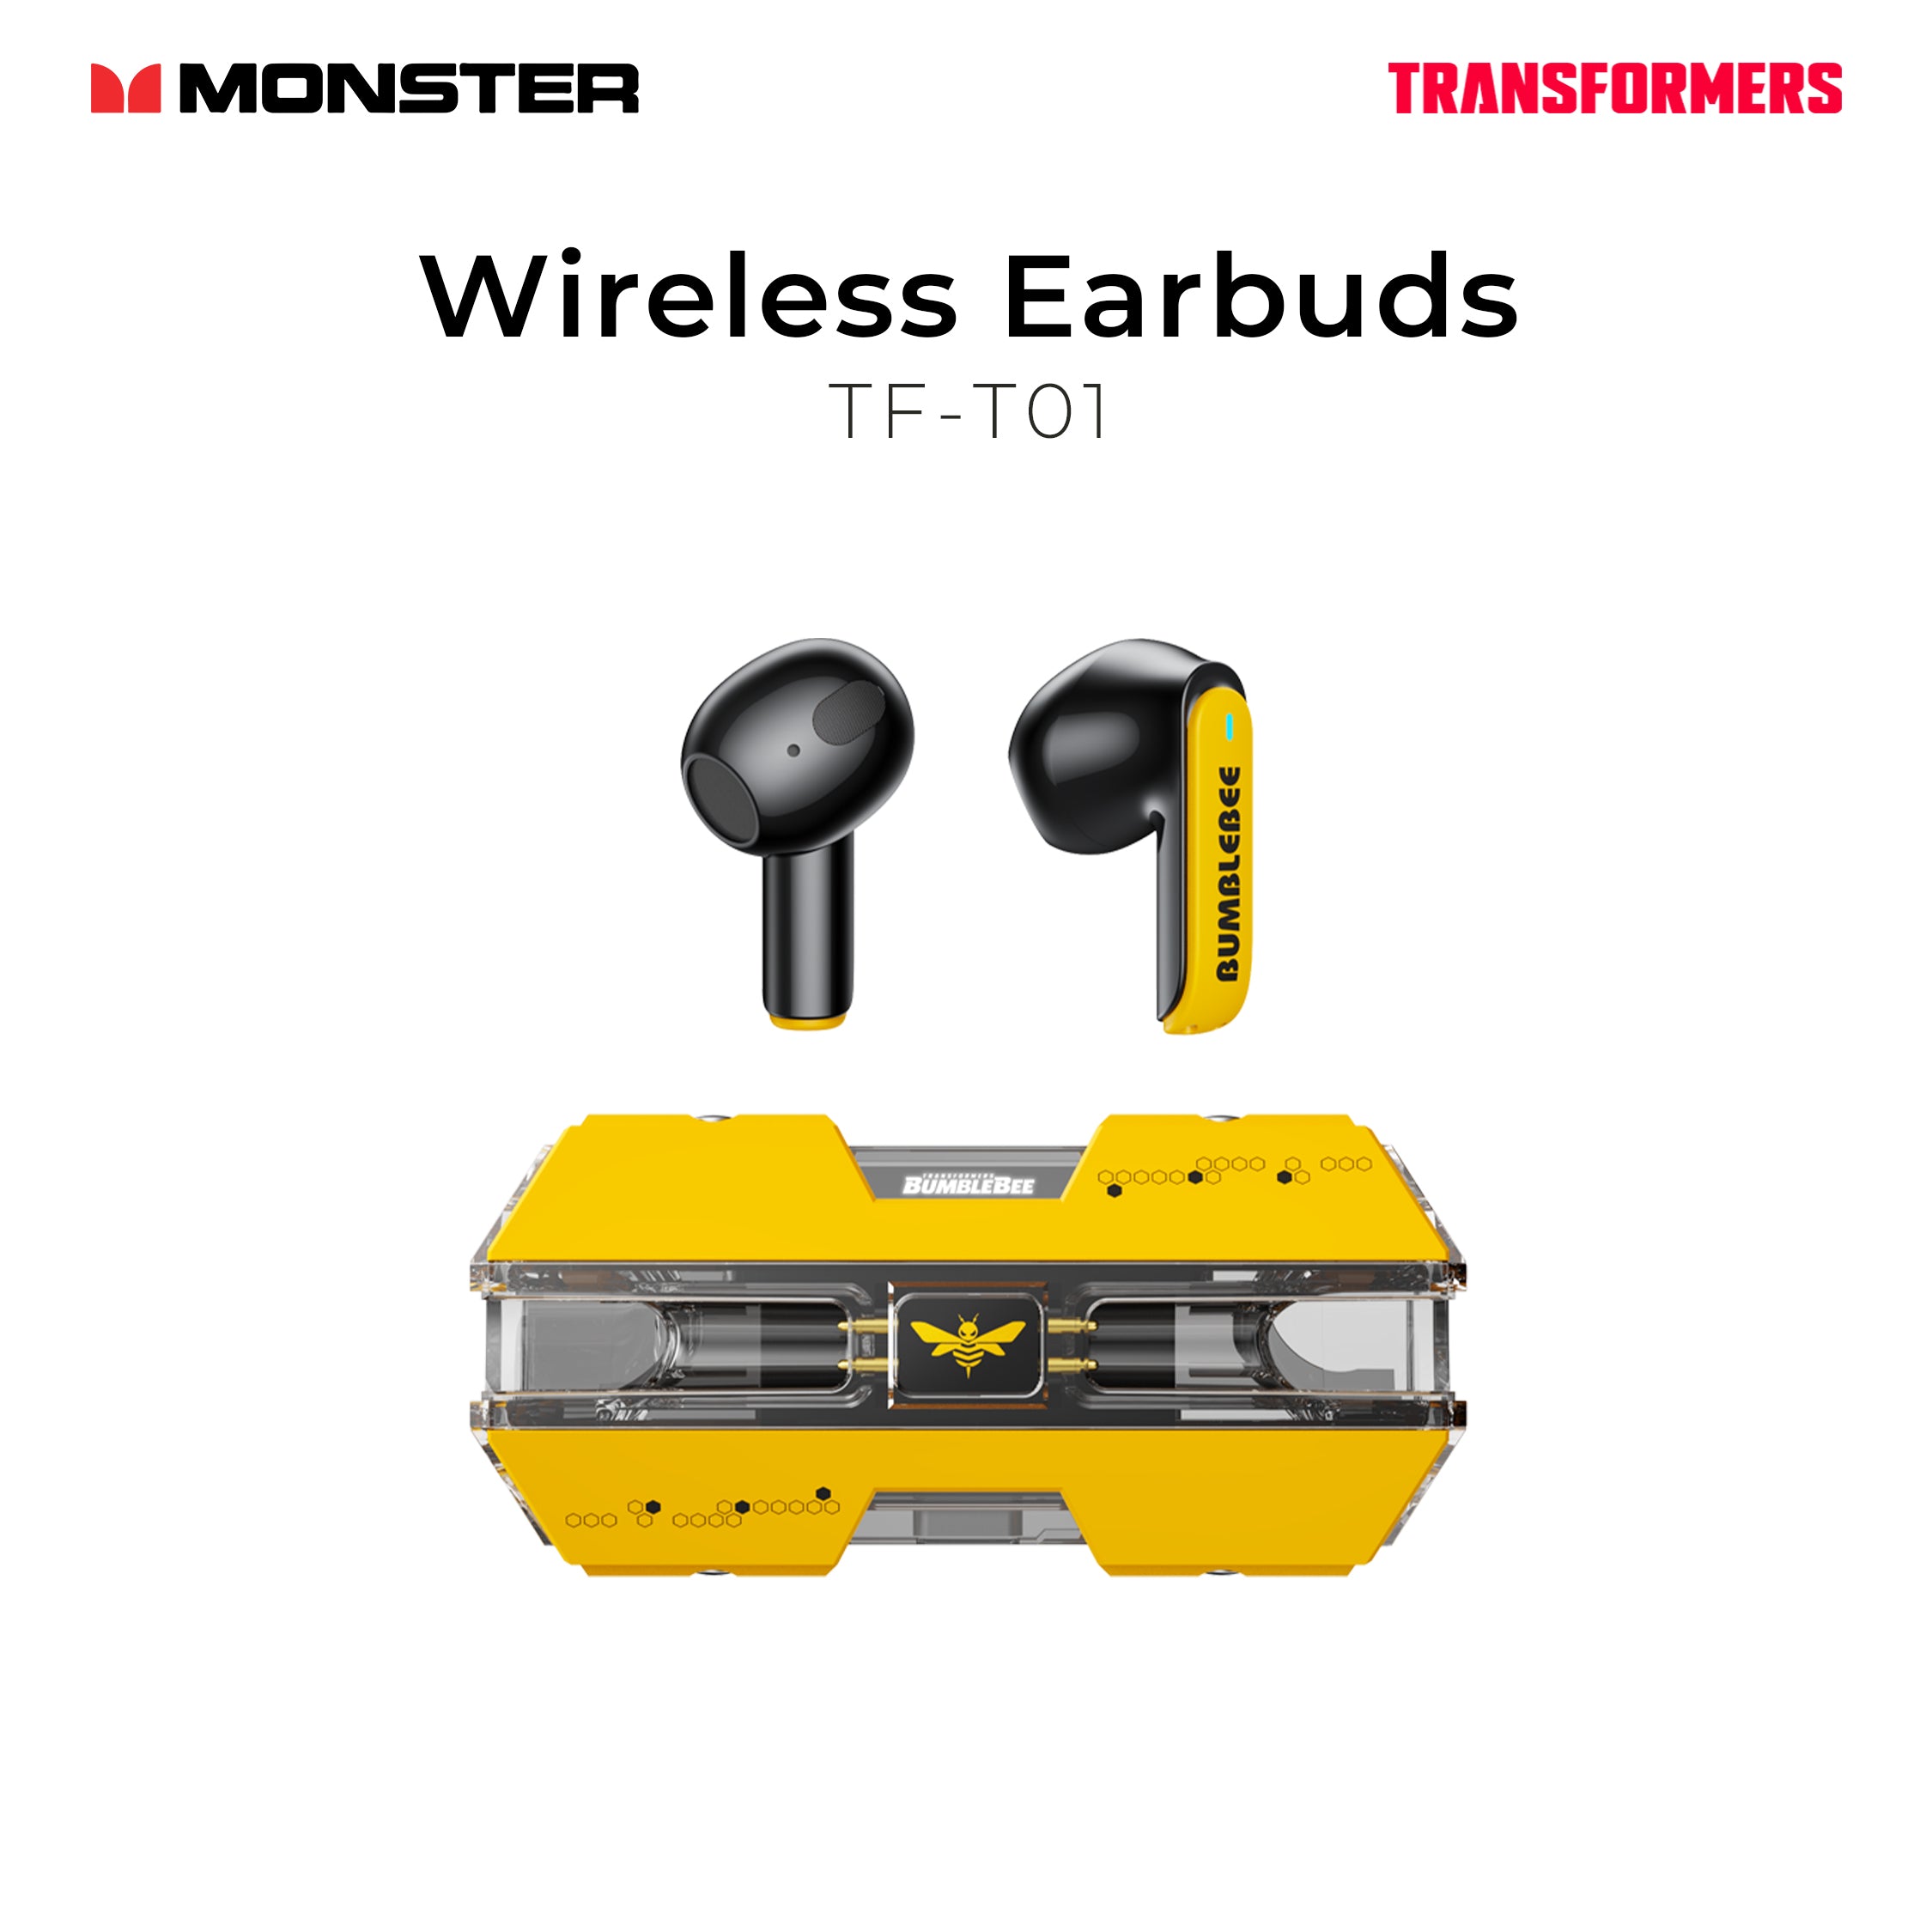 Monster Transformers Wireless Earbuds TF-T01